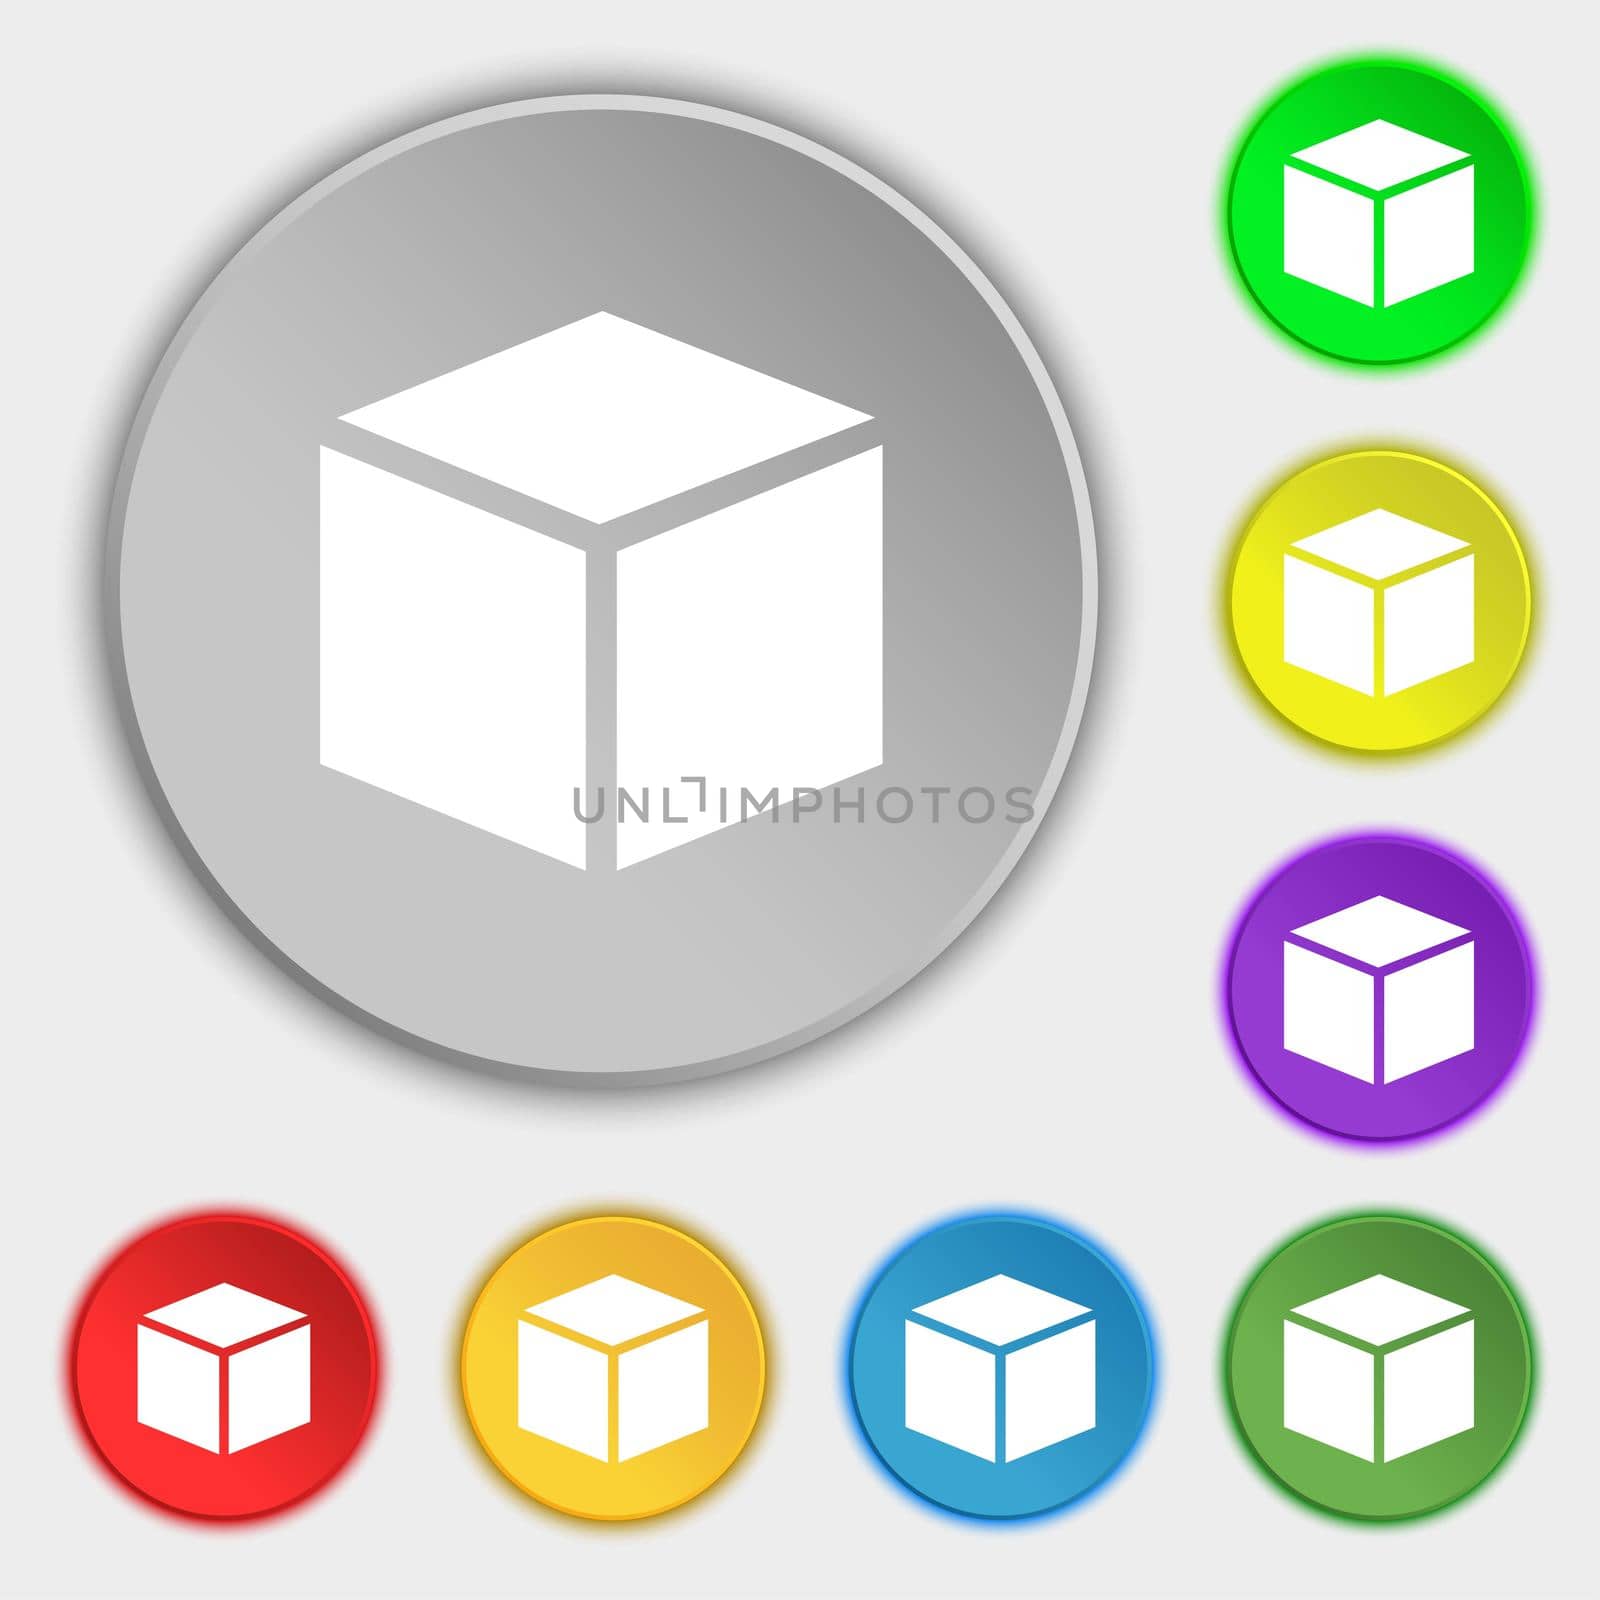 3d cube icon sign. Symbols on eight flat buttons. illustration